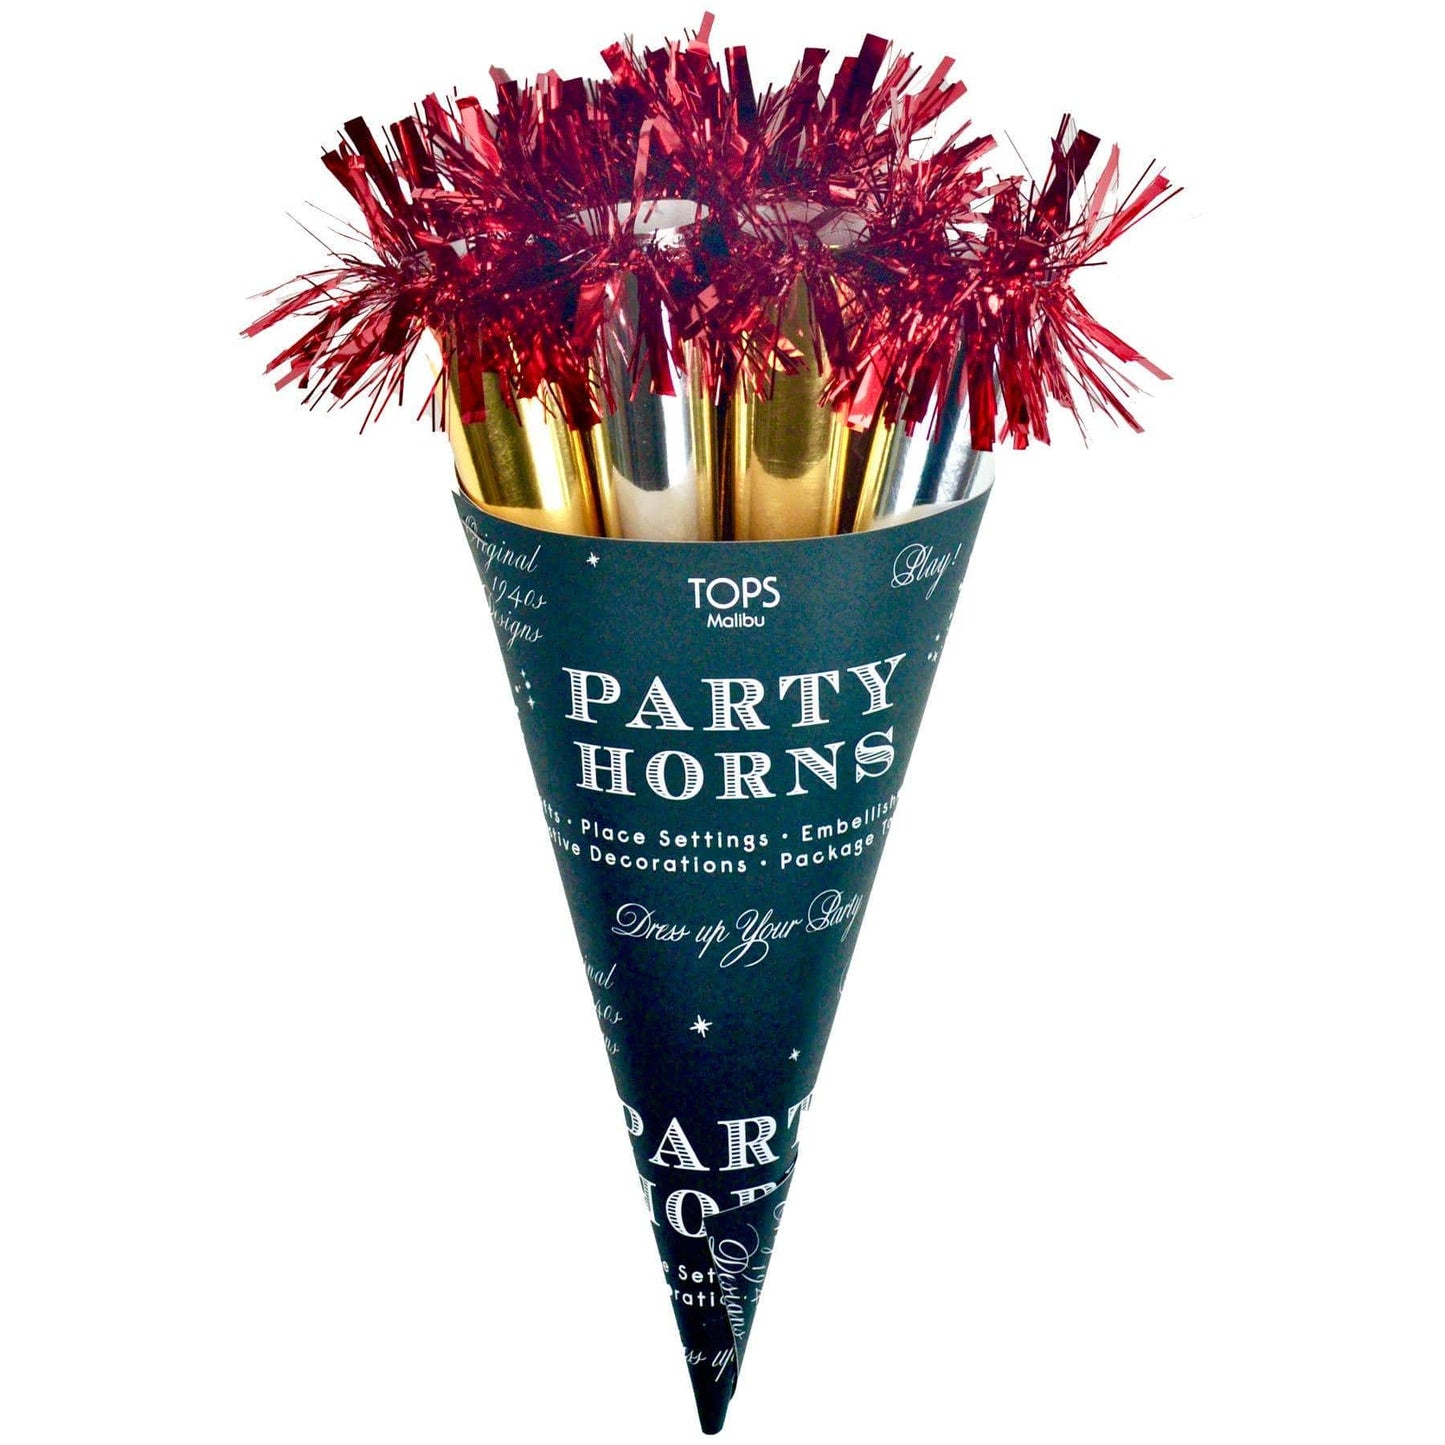 Hot! Cha-Cha Gold Silver and Red Party Horn Bouquet